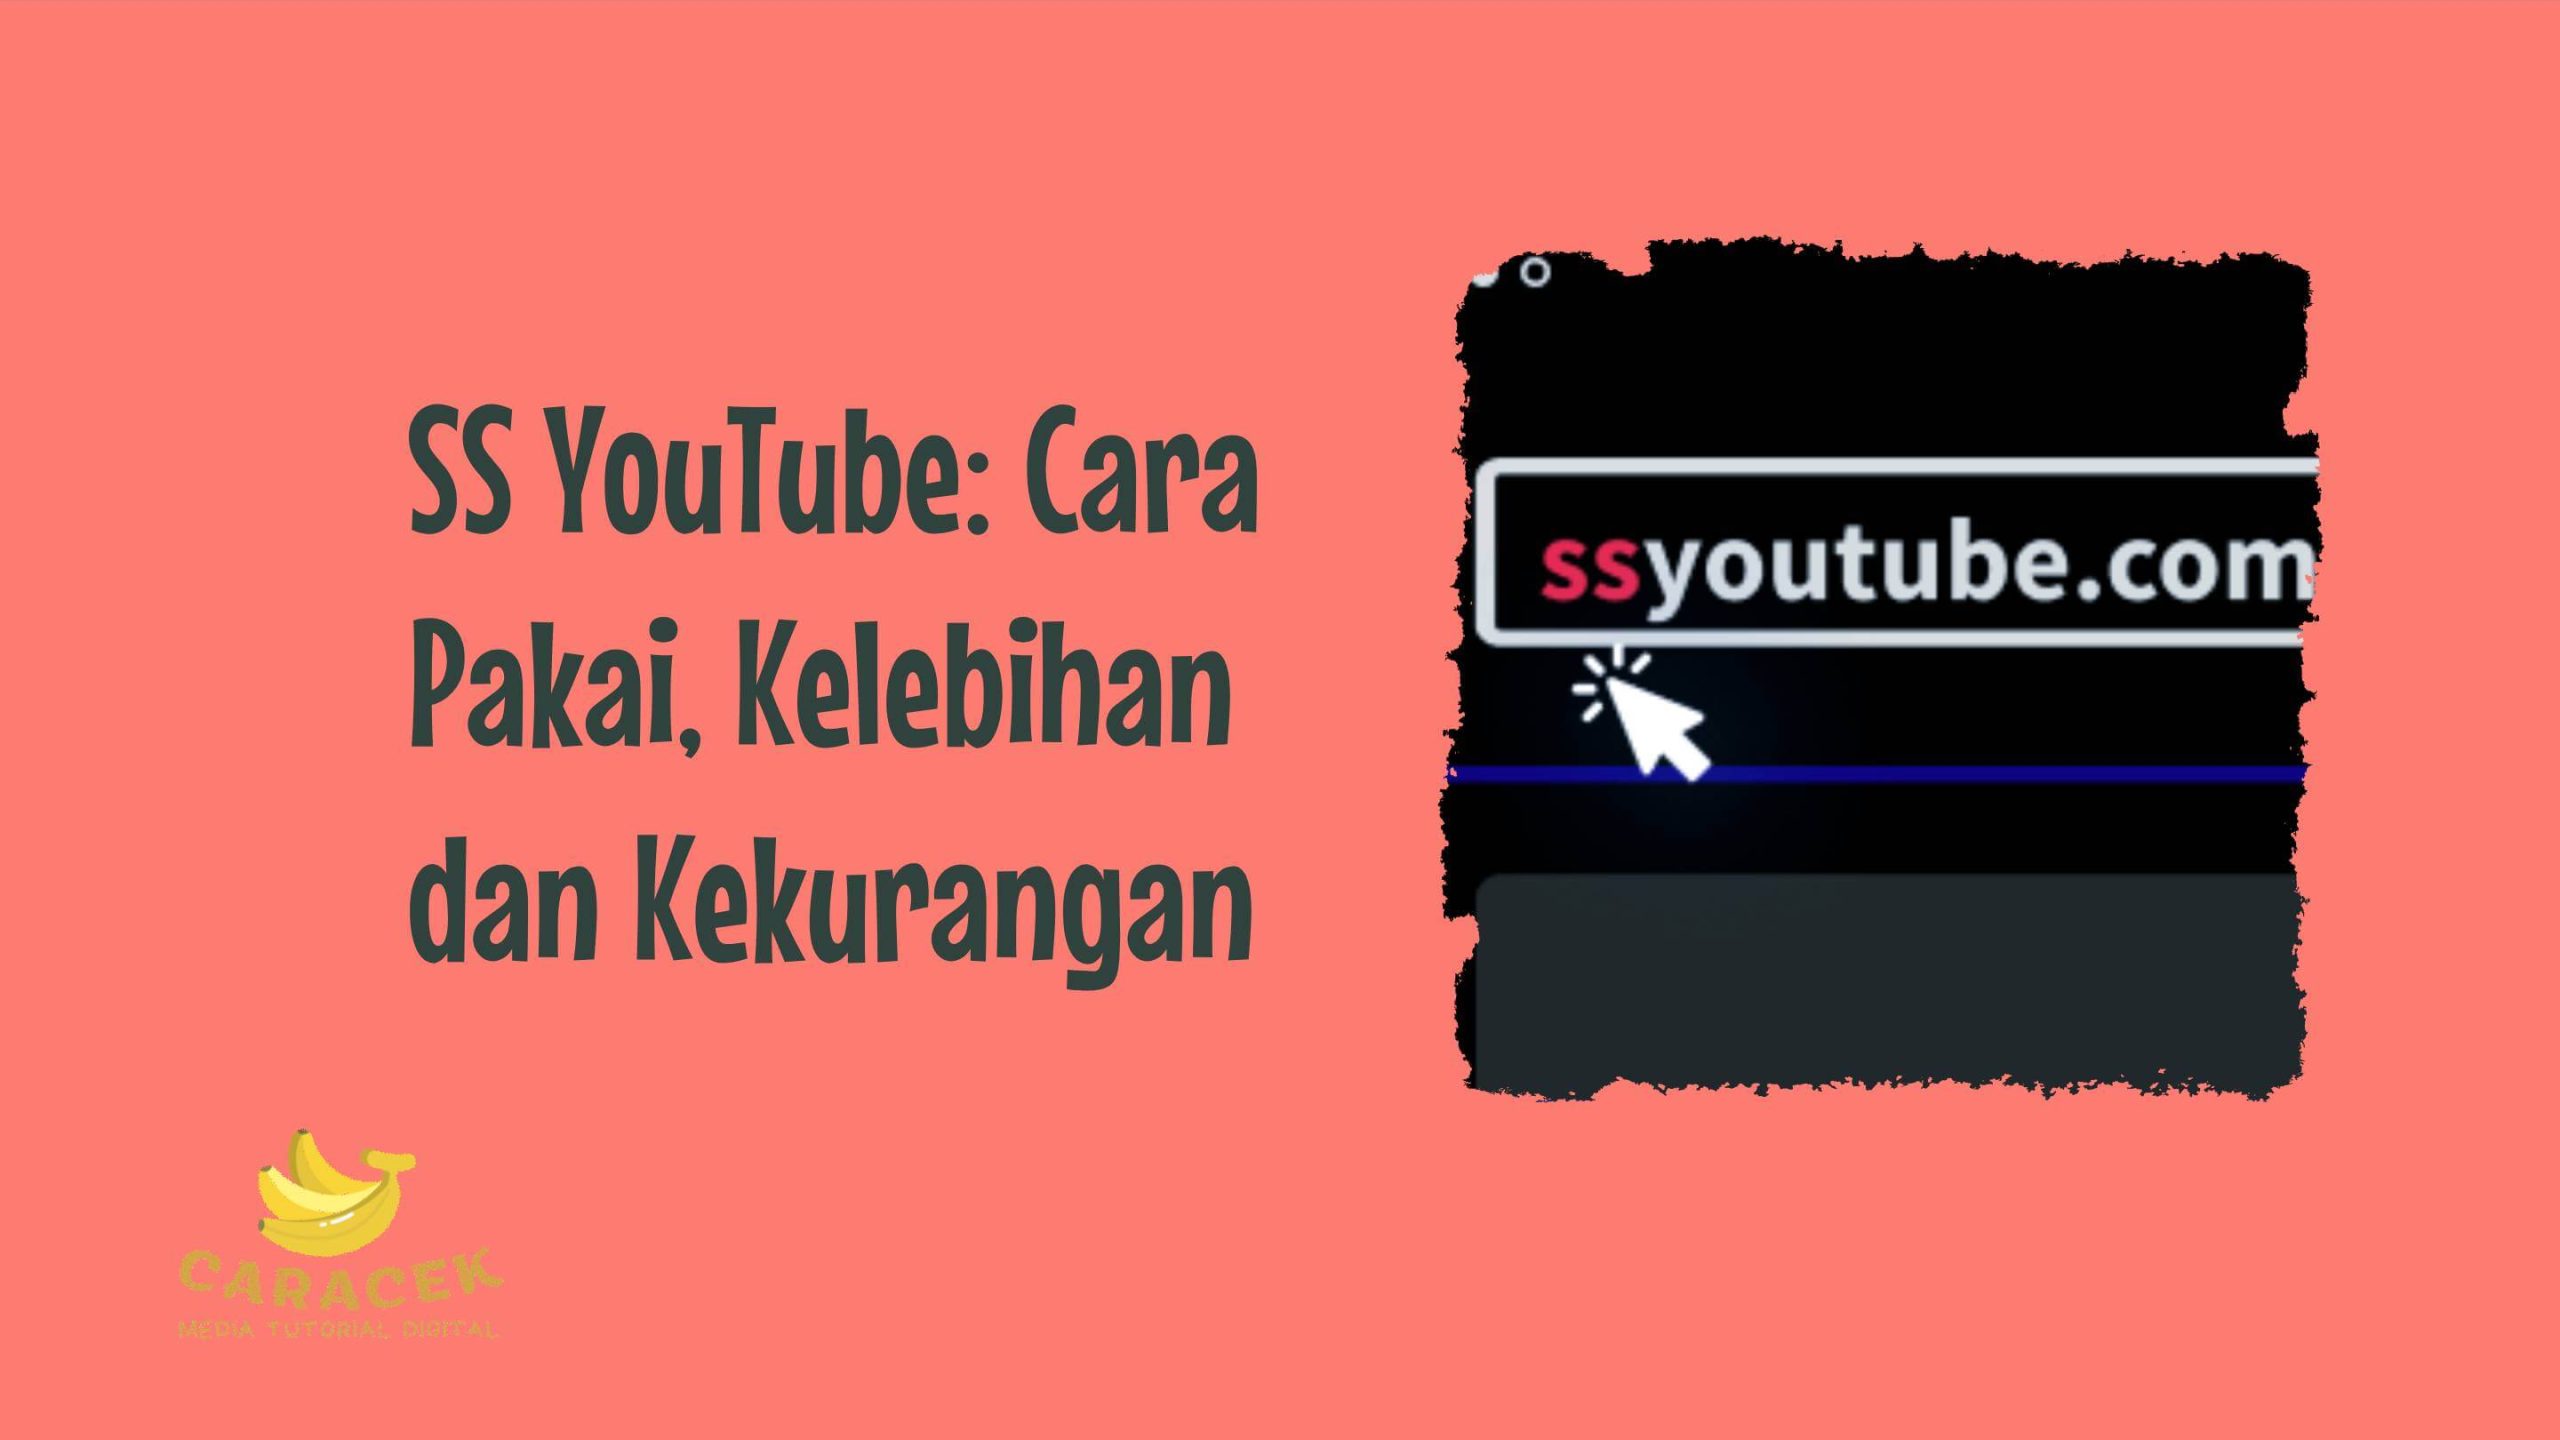 SS YouTube